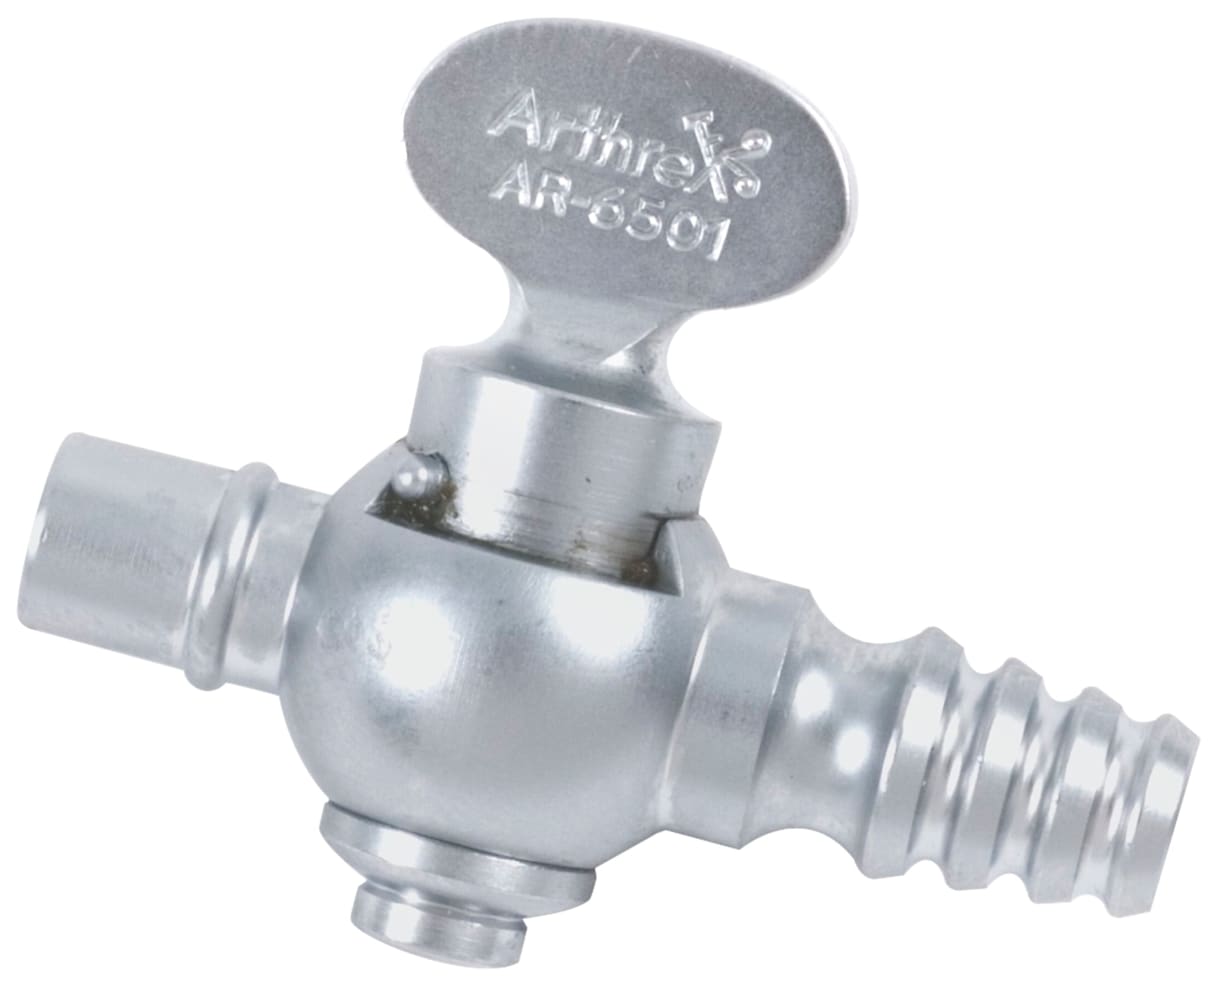 Valve for Inflow Cannula, qty. 2